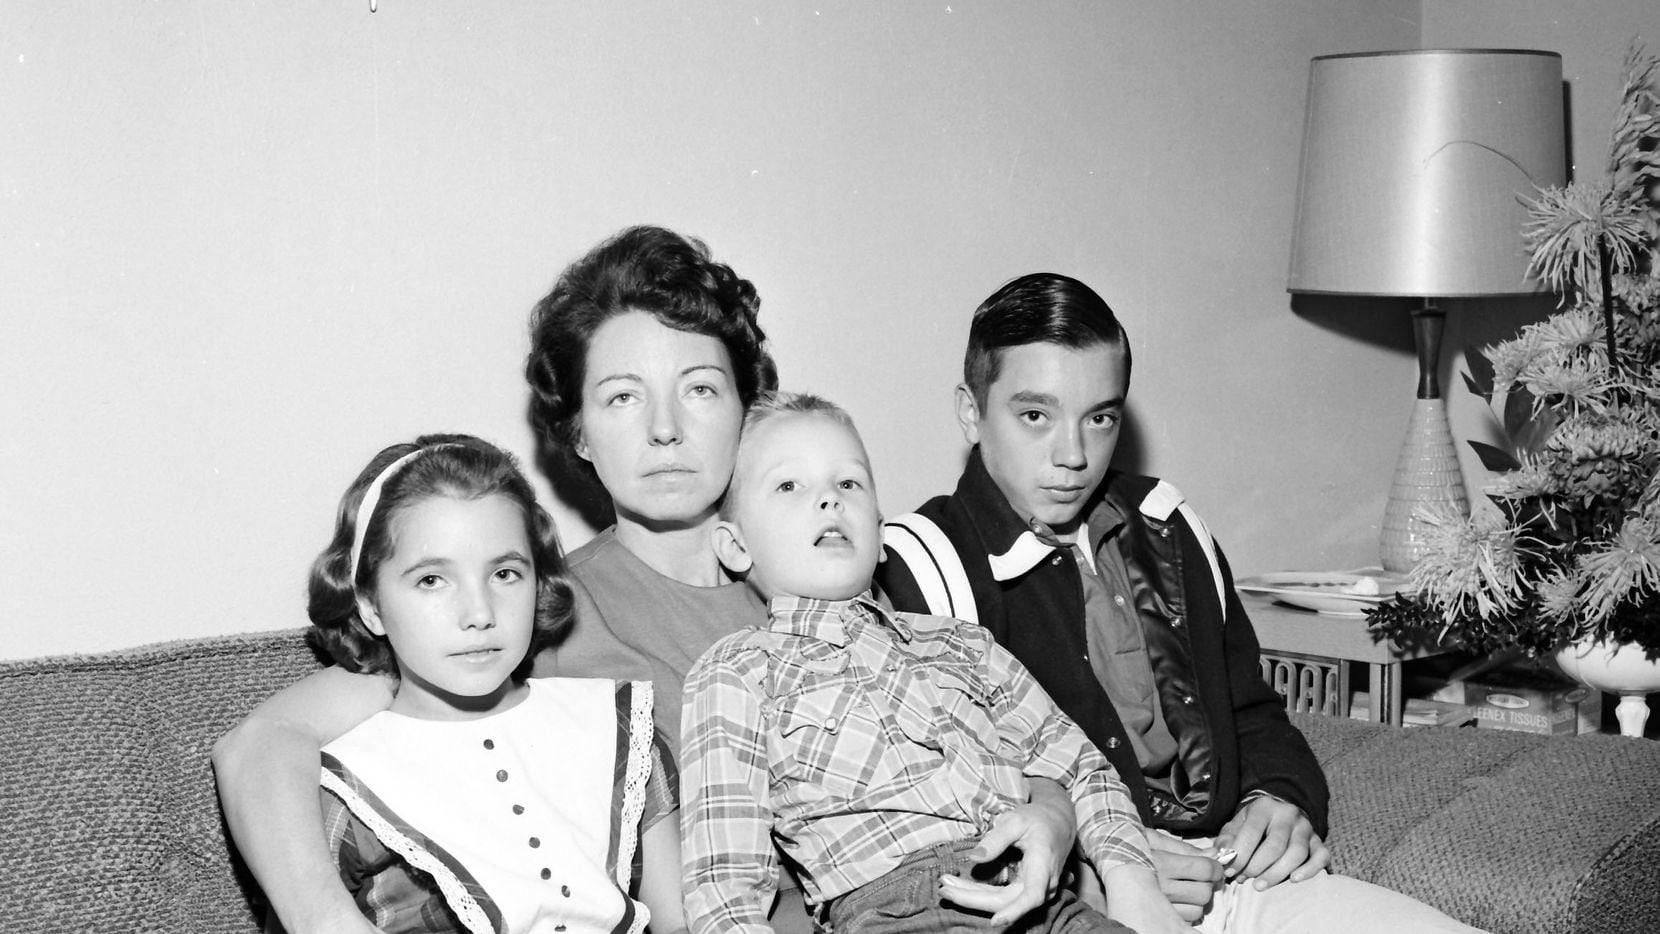 Marie Tippit, widow of Dallas police officer gunned down by Lee Harvey  Oswald, dies at 92